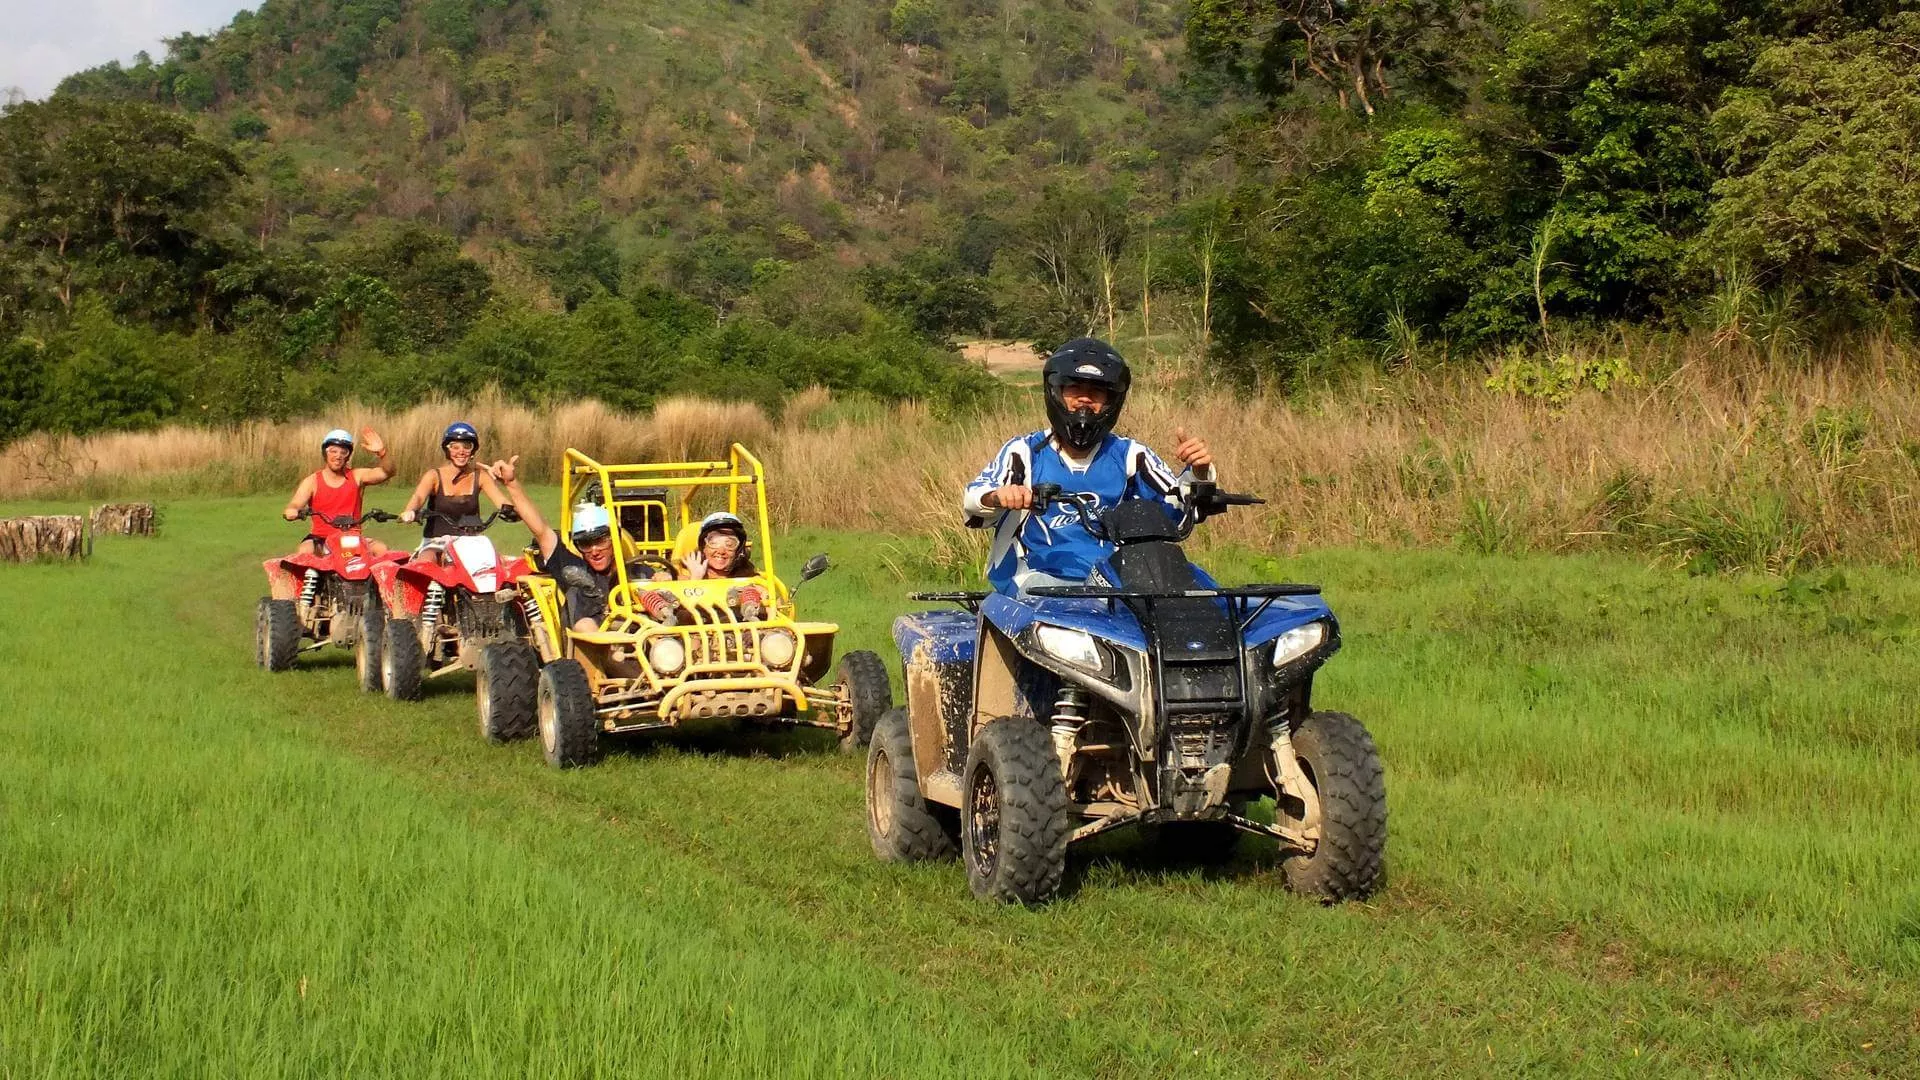 ATV Adventures Pattaya in Thailand, Central Asia | Adventure Parks - Rated 3.6